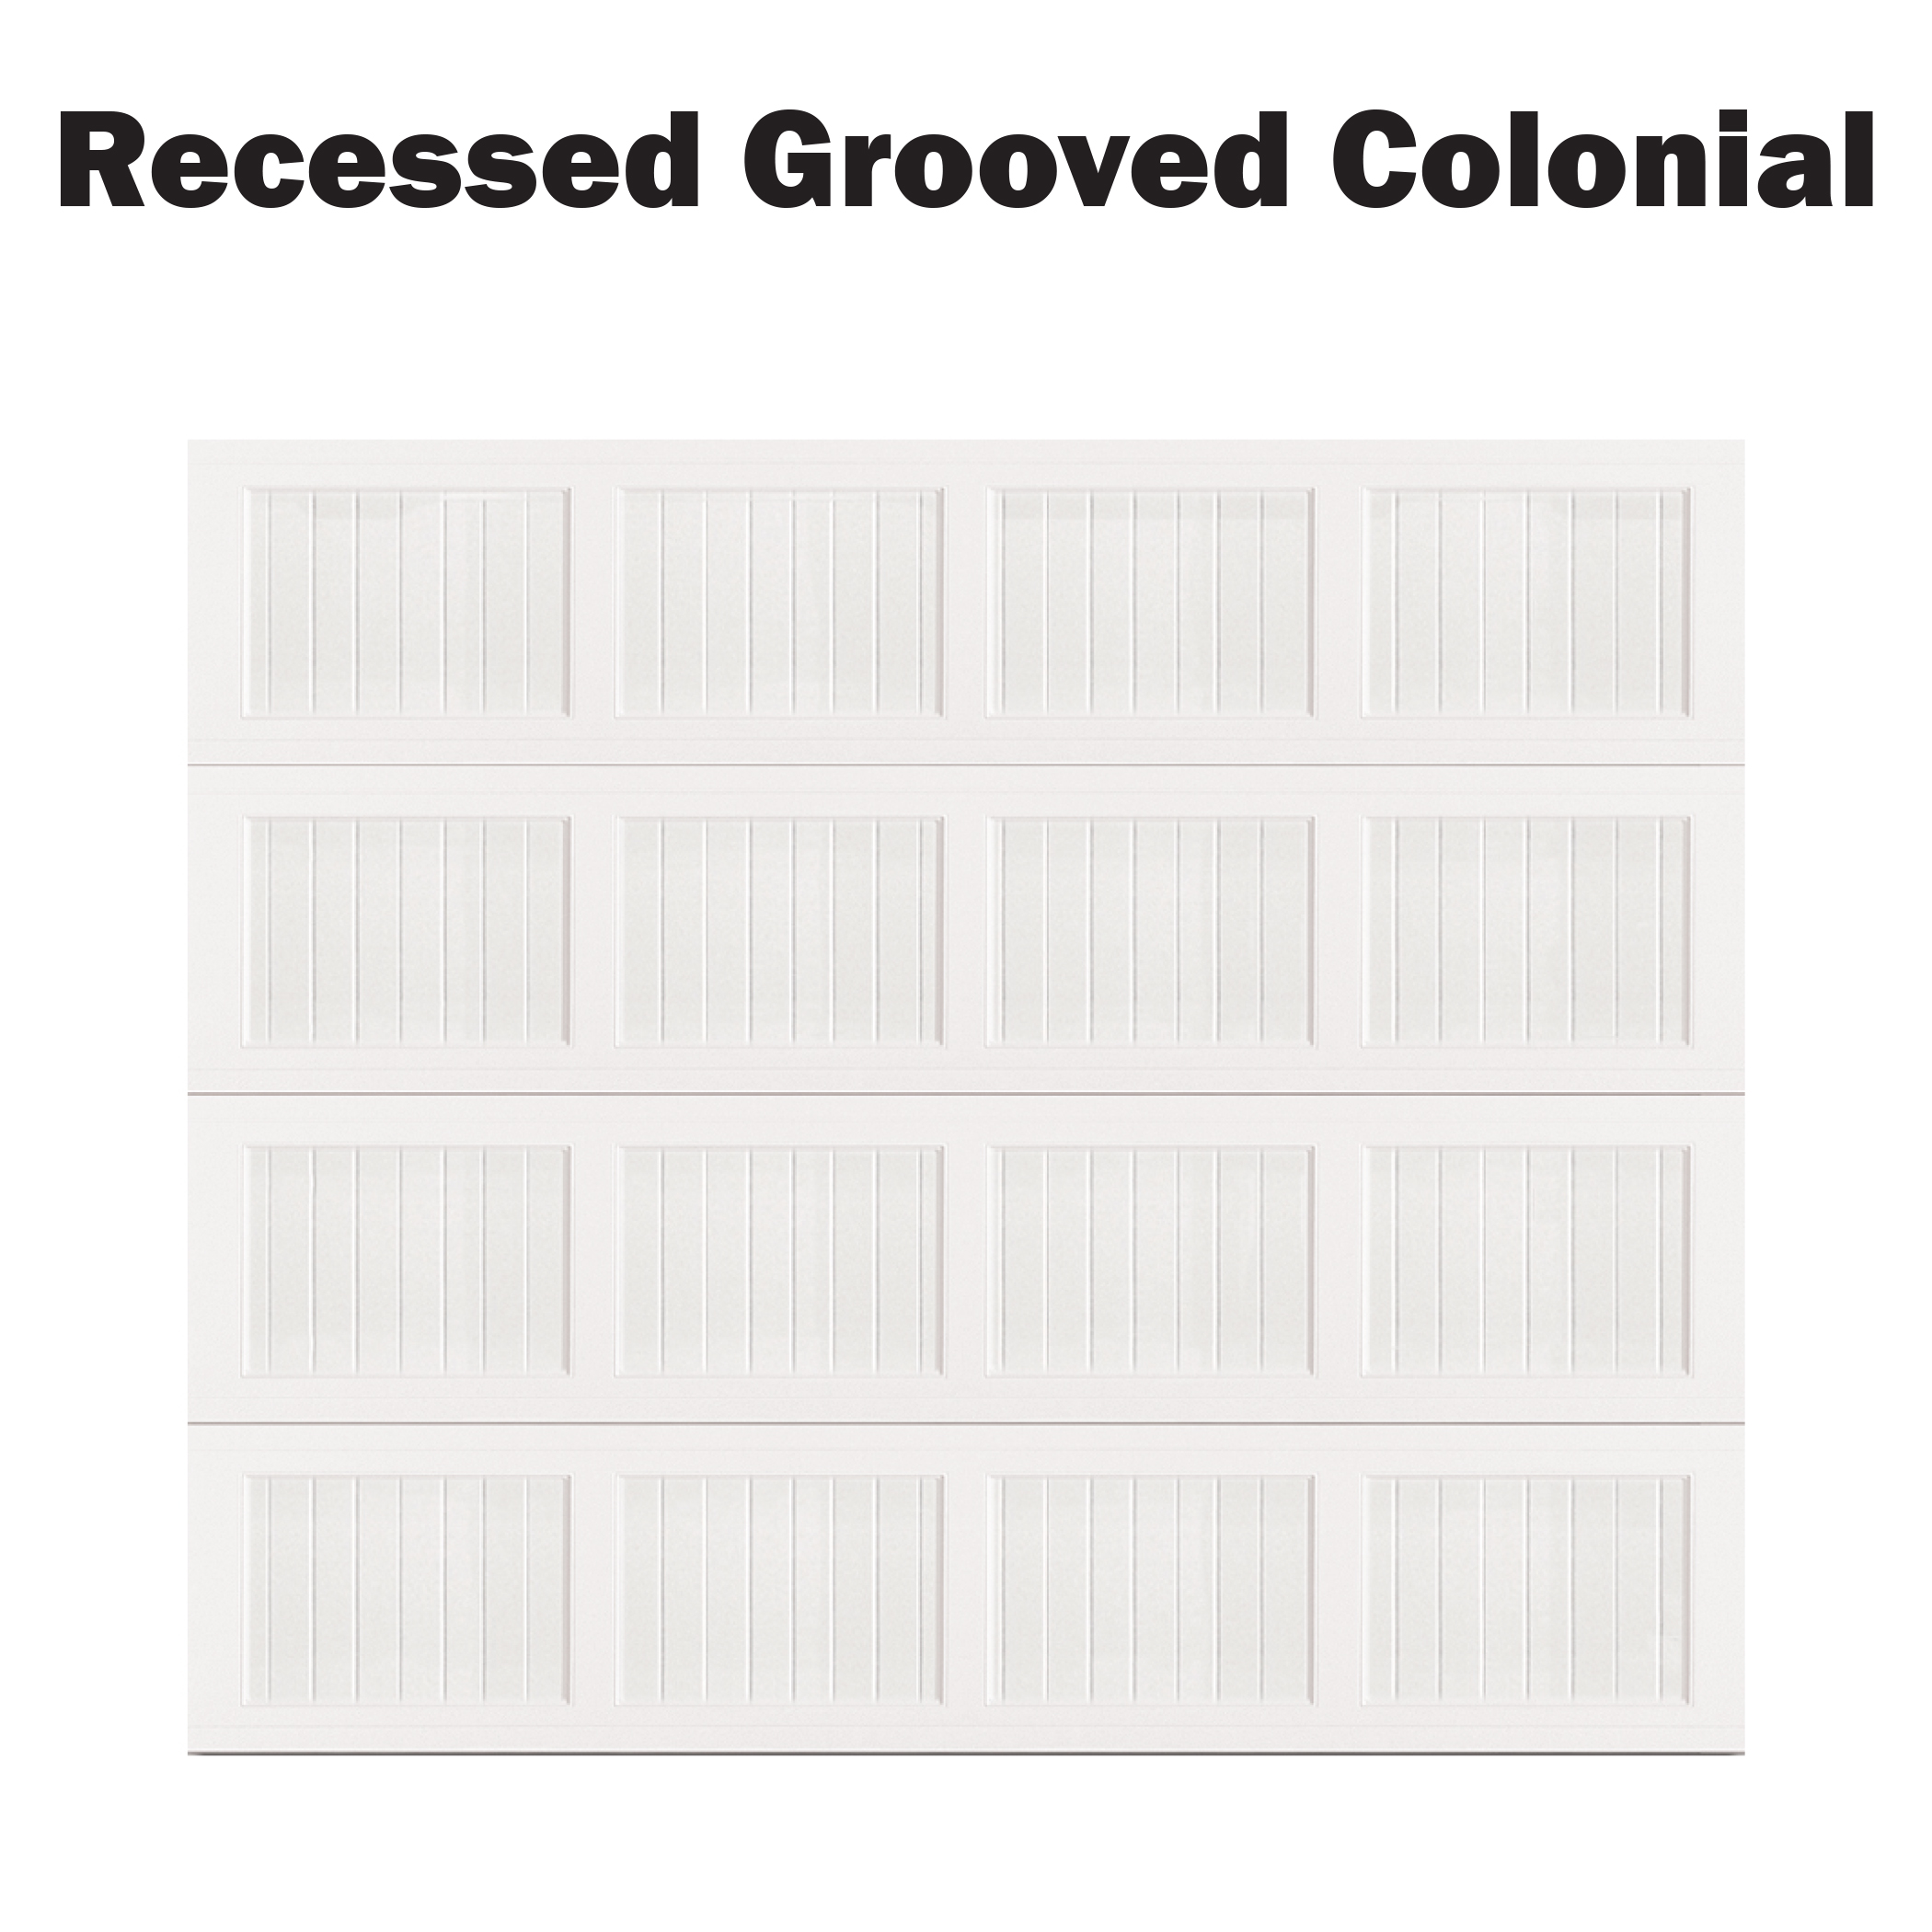 Recessed Grooved Colonial - Classic.jpg